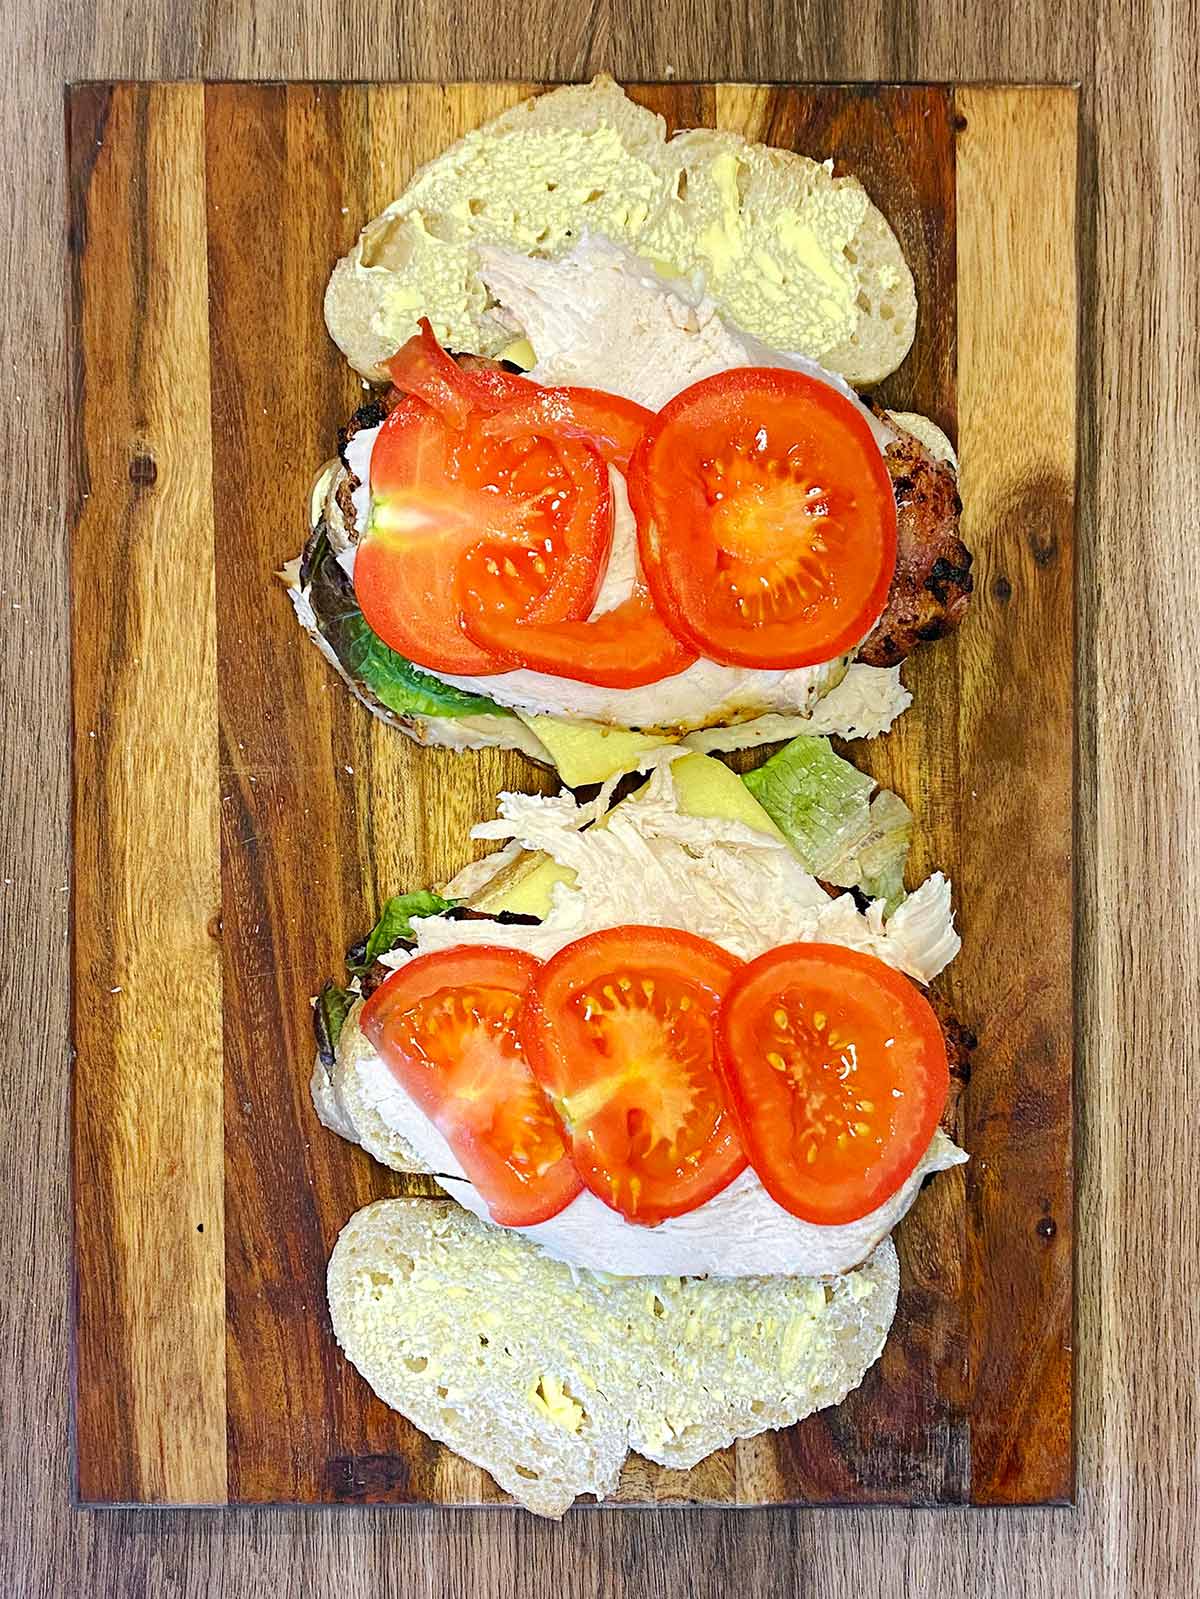 More turkey and sliced tomatoes added to the sandwich.